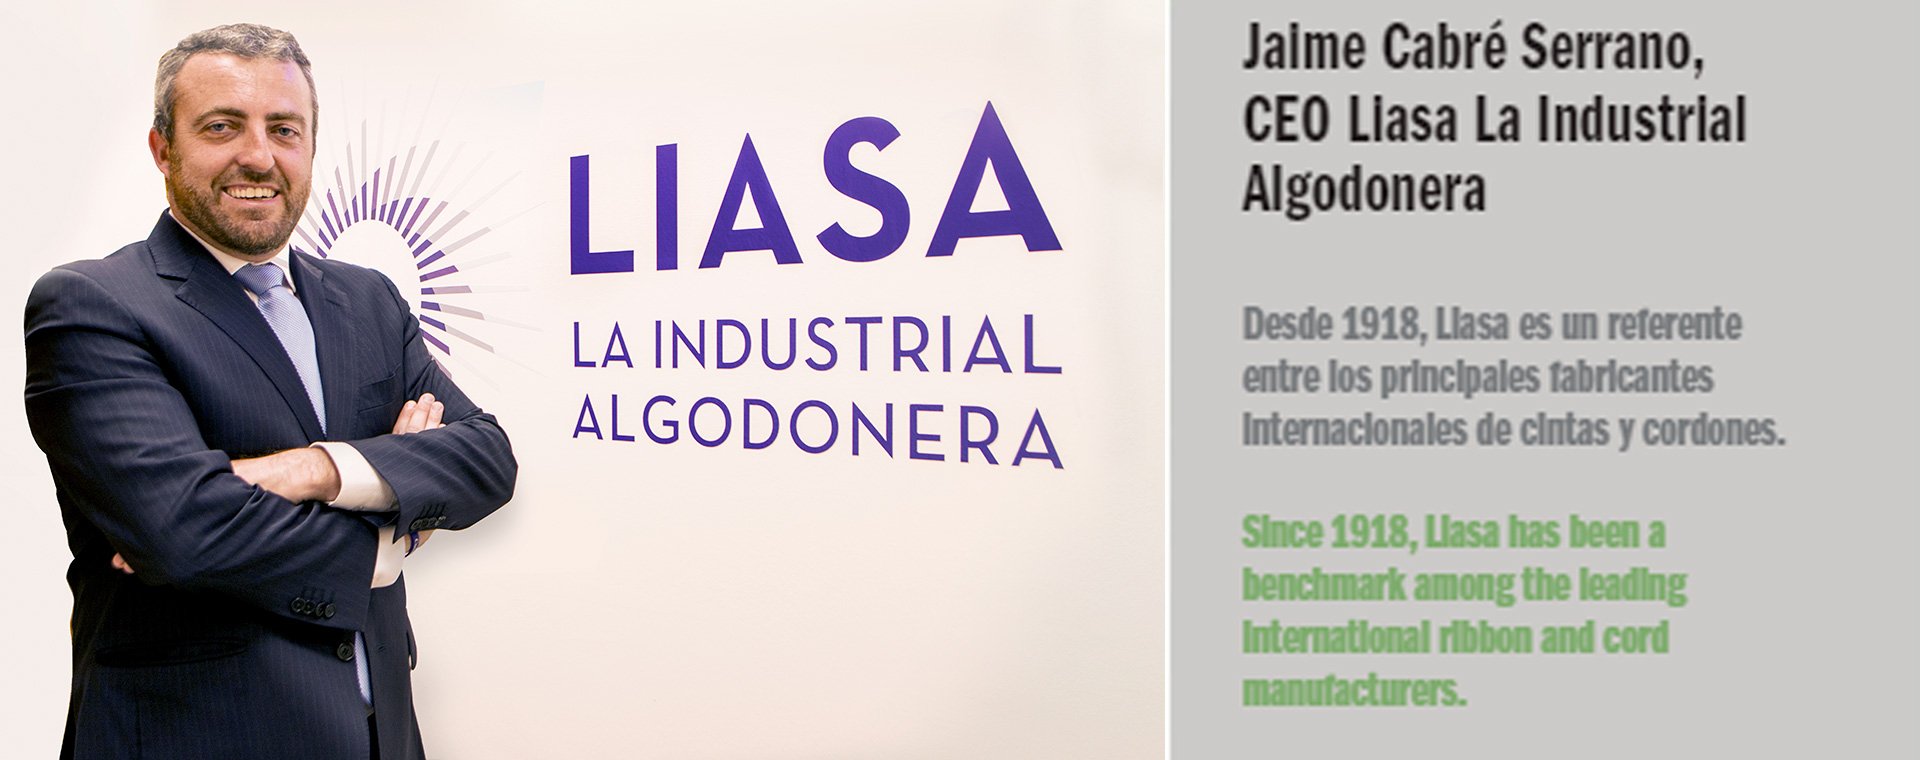 Interview with Jaime Cabré in the latest issue of News Packaging magazine